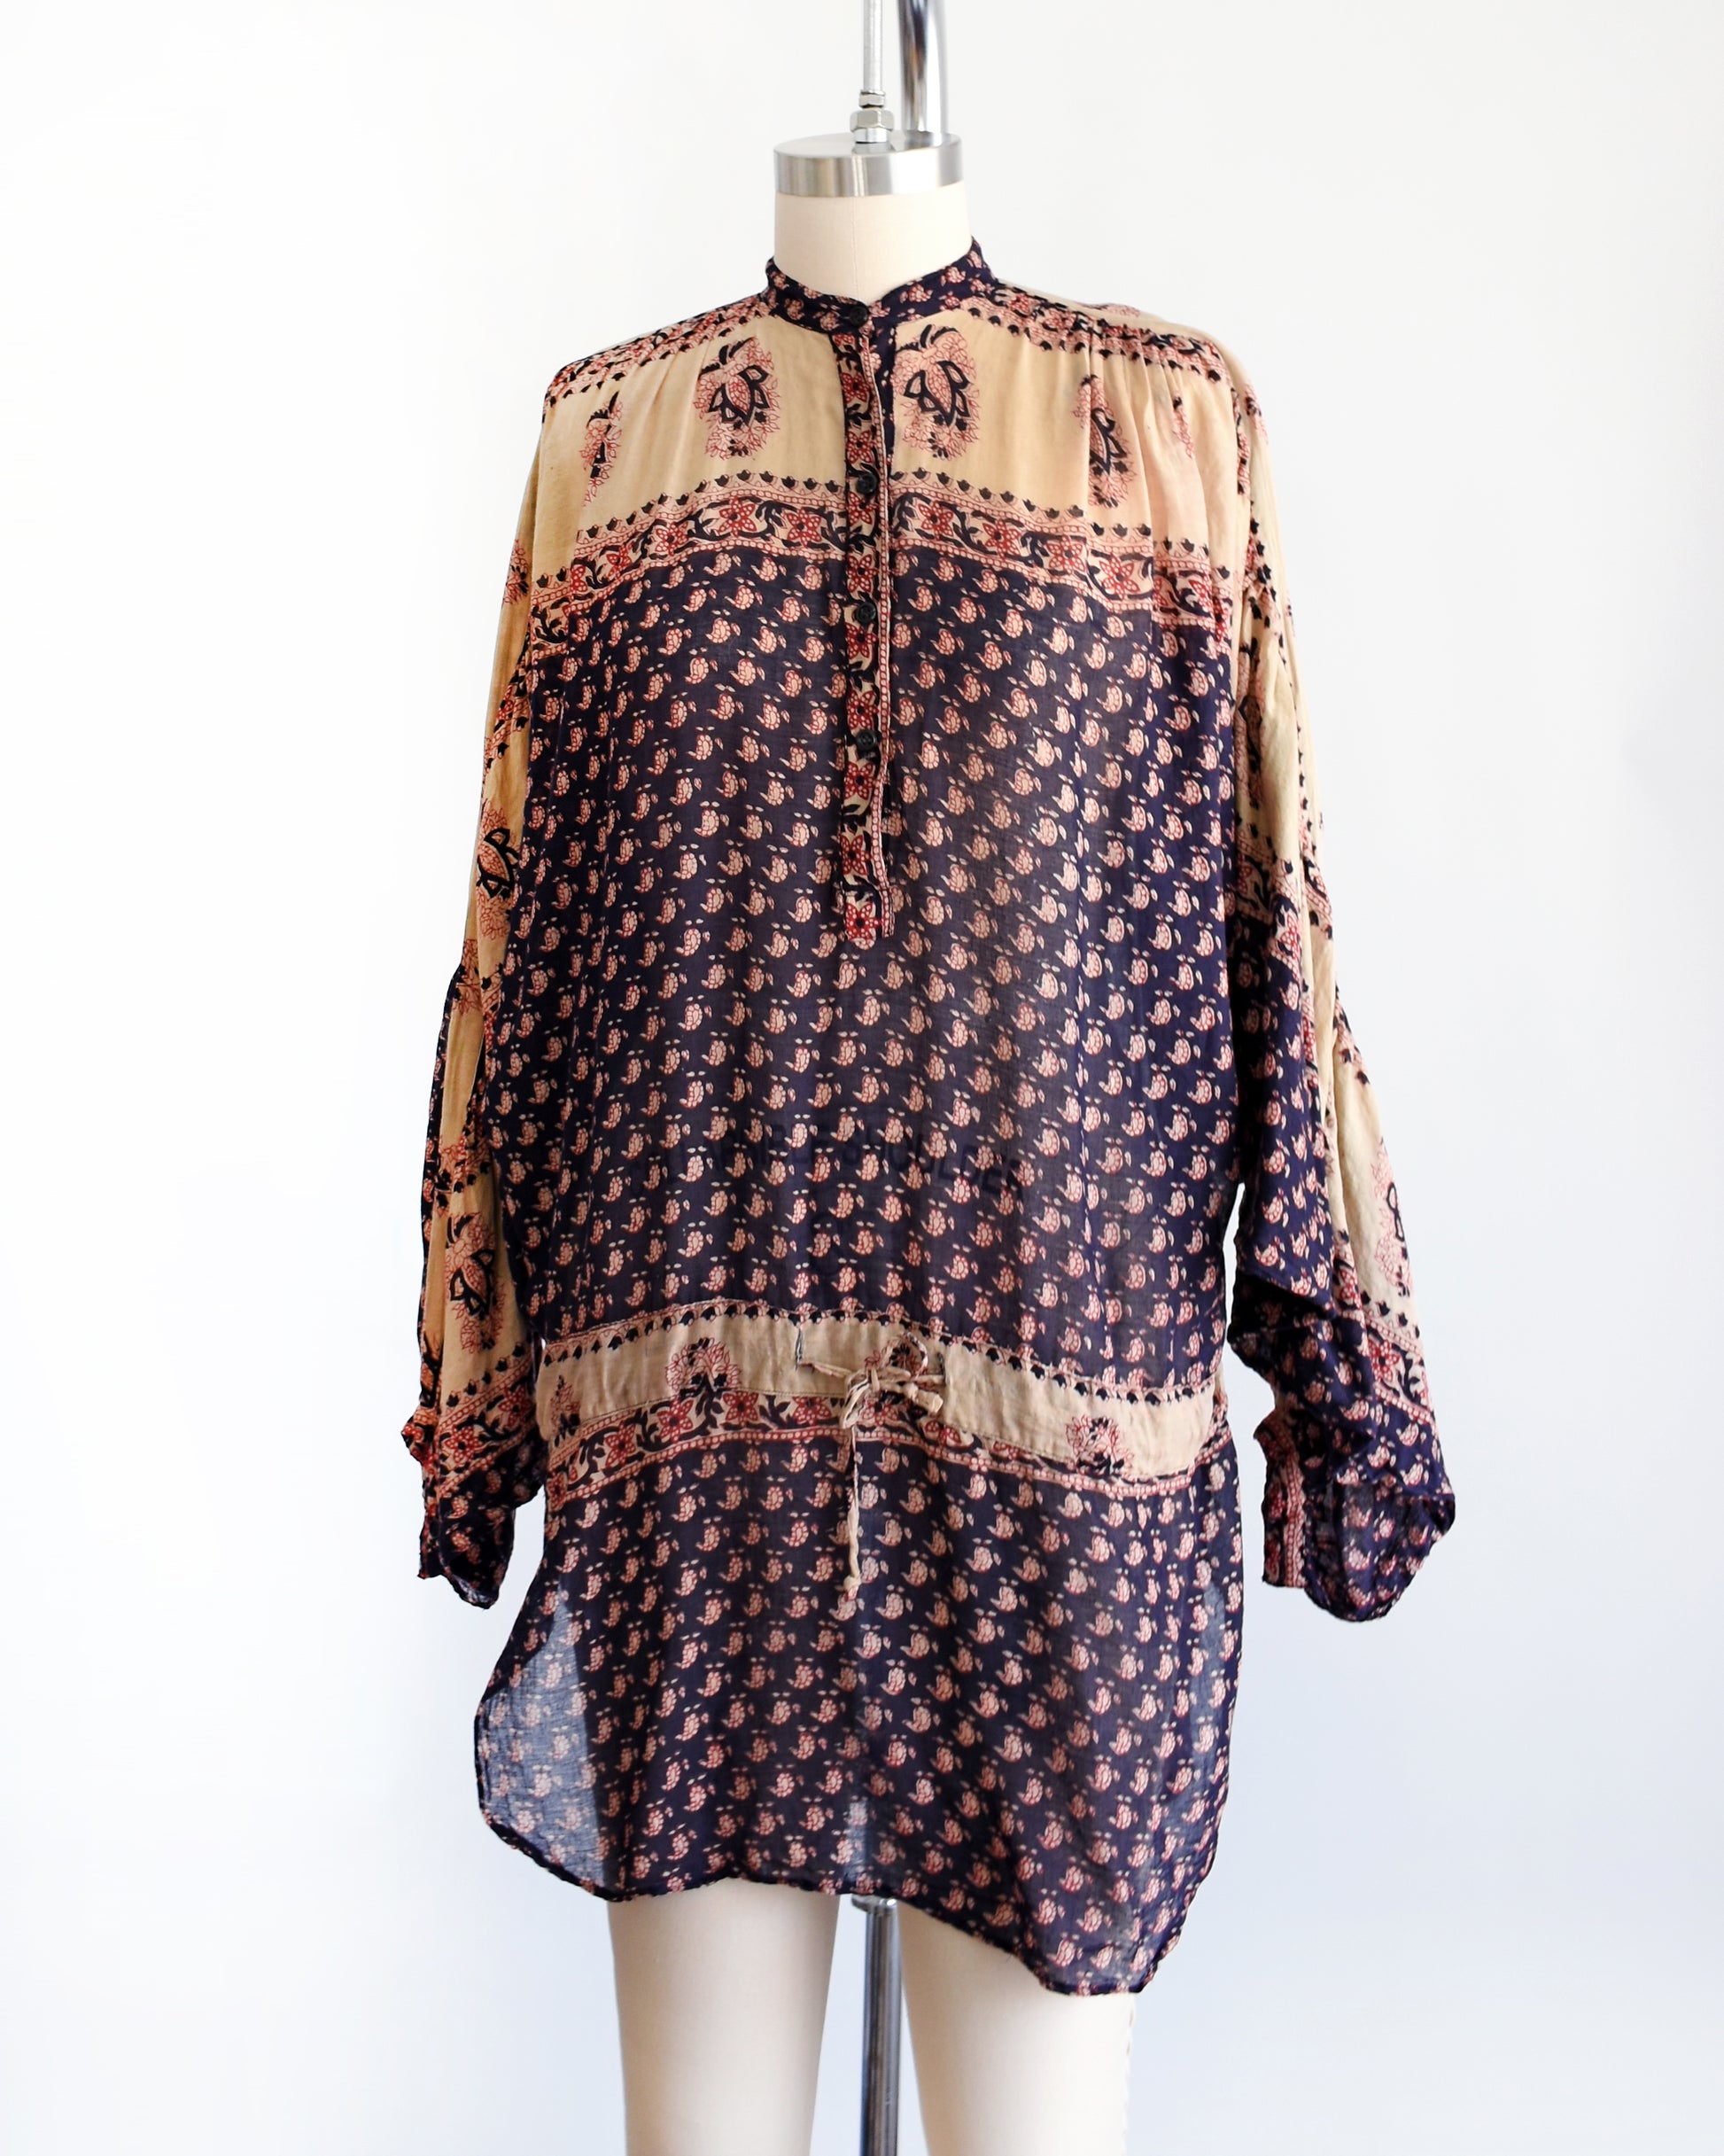 Side front view of a A vintage 1970s Indian cotton tunic made from thin, gauzy navy blue and light tan cotton with a red and navy floral block print